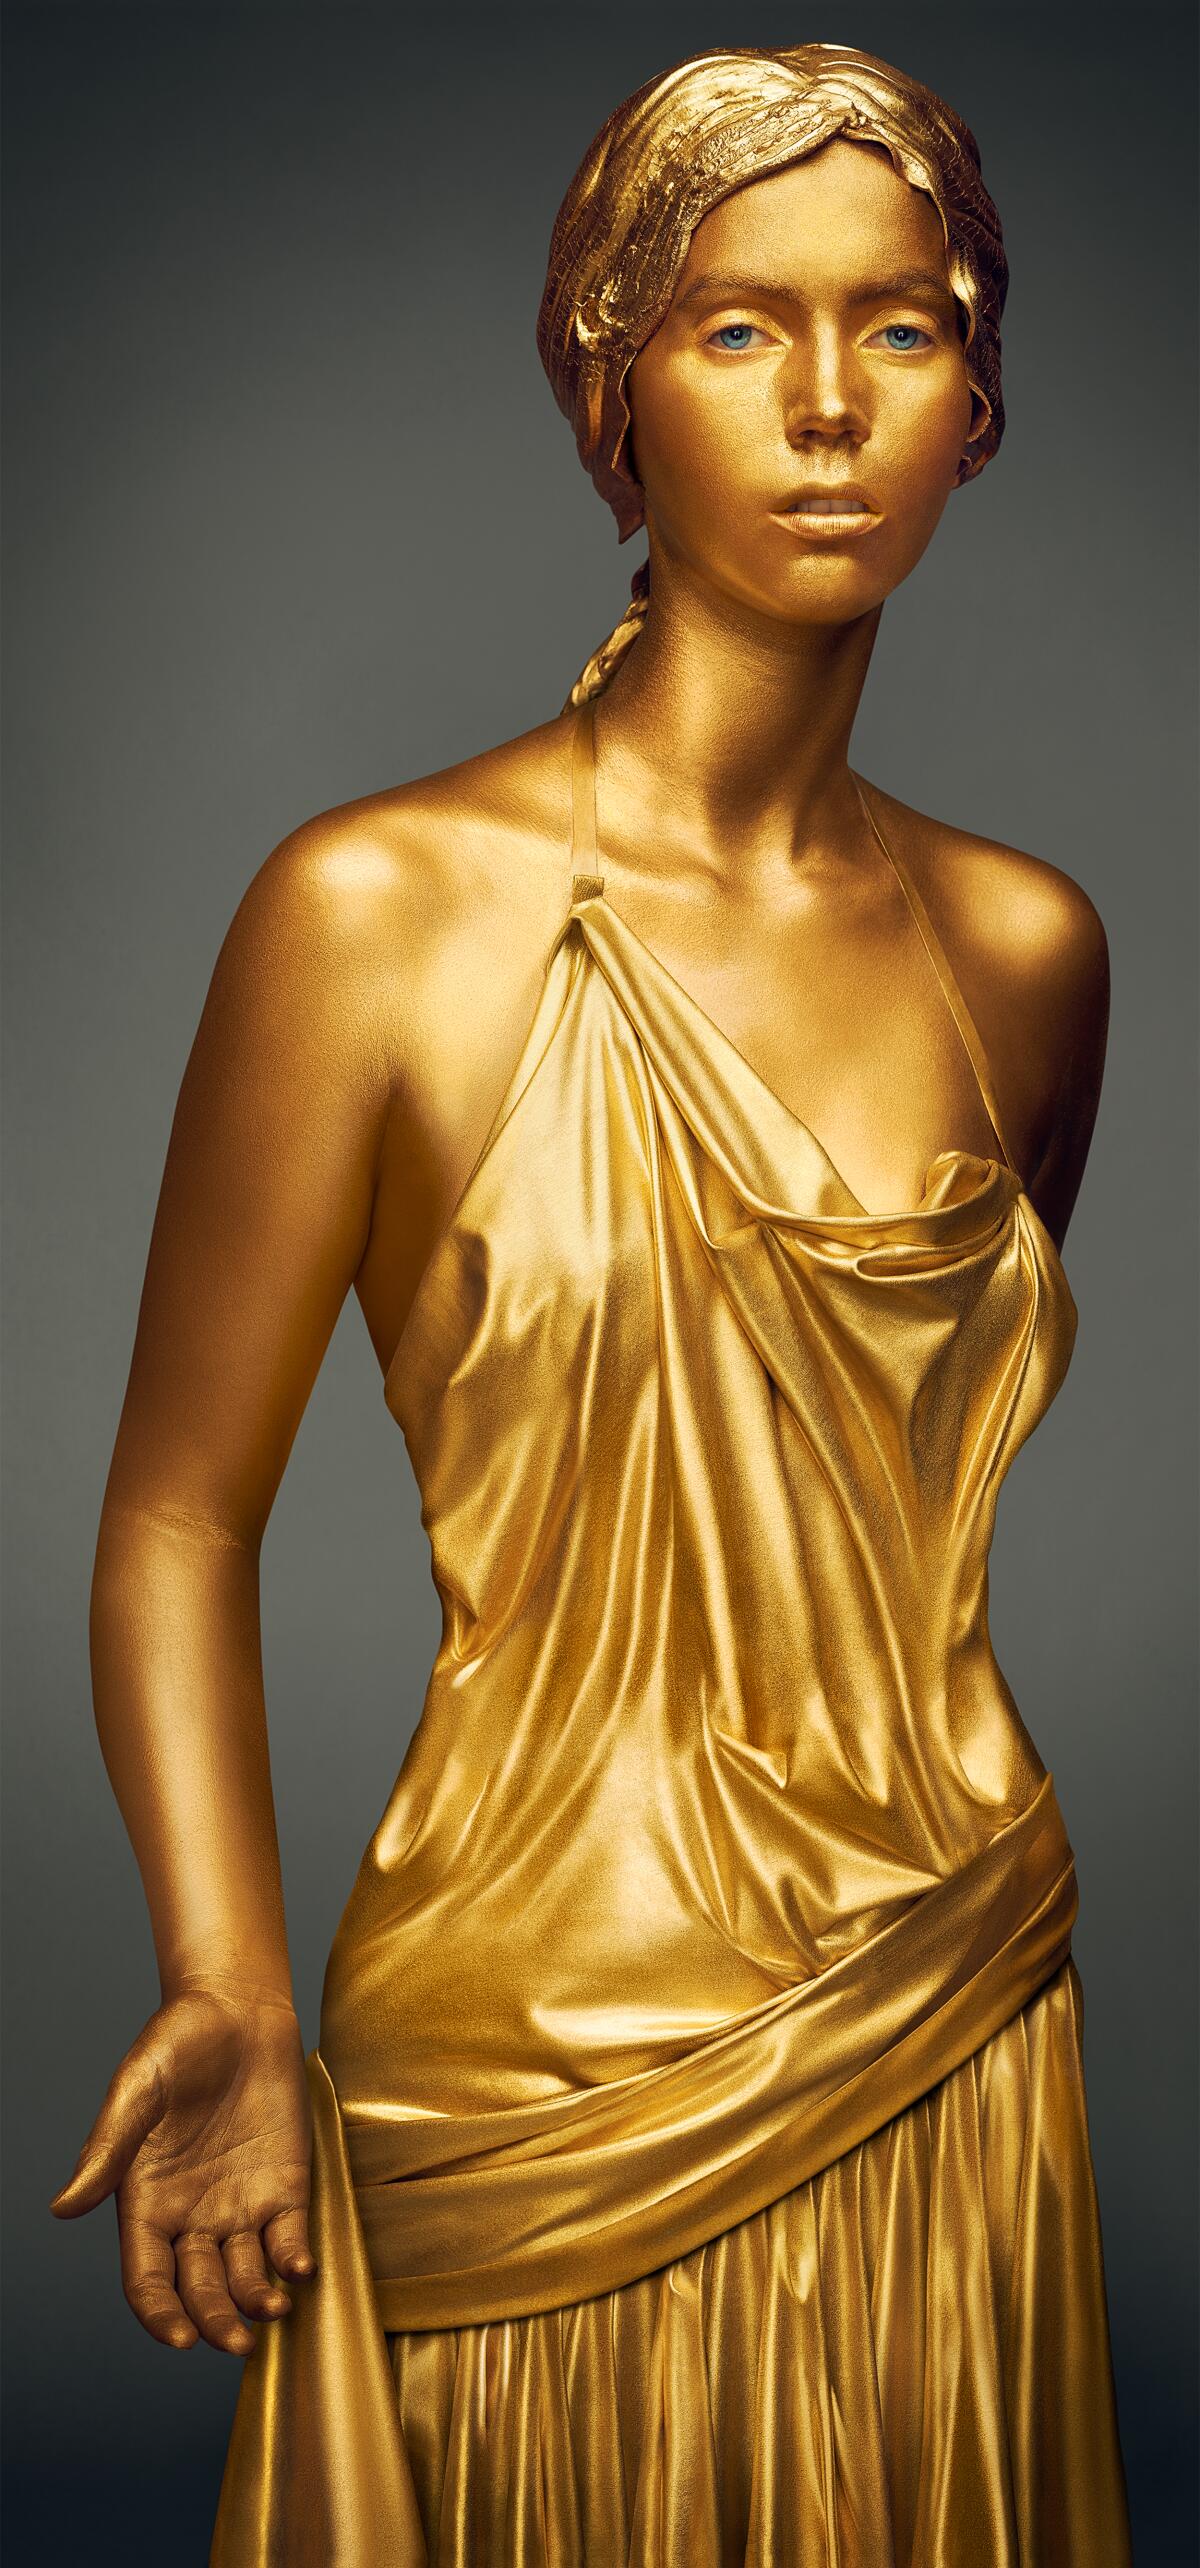 A woman in a metallic dress painted in all gold